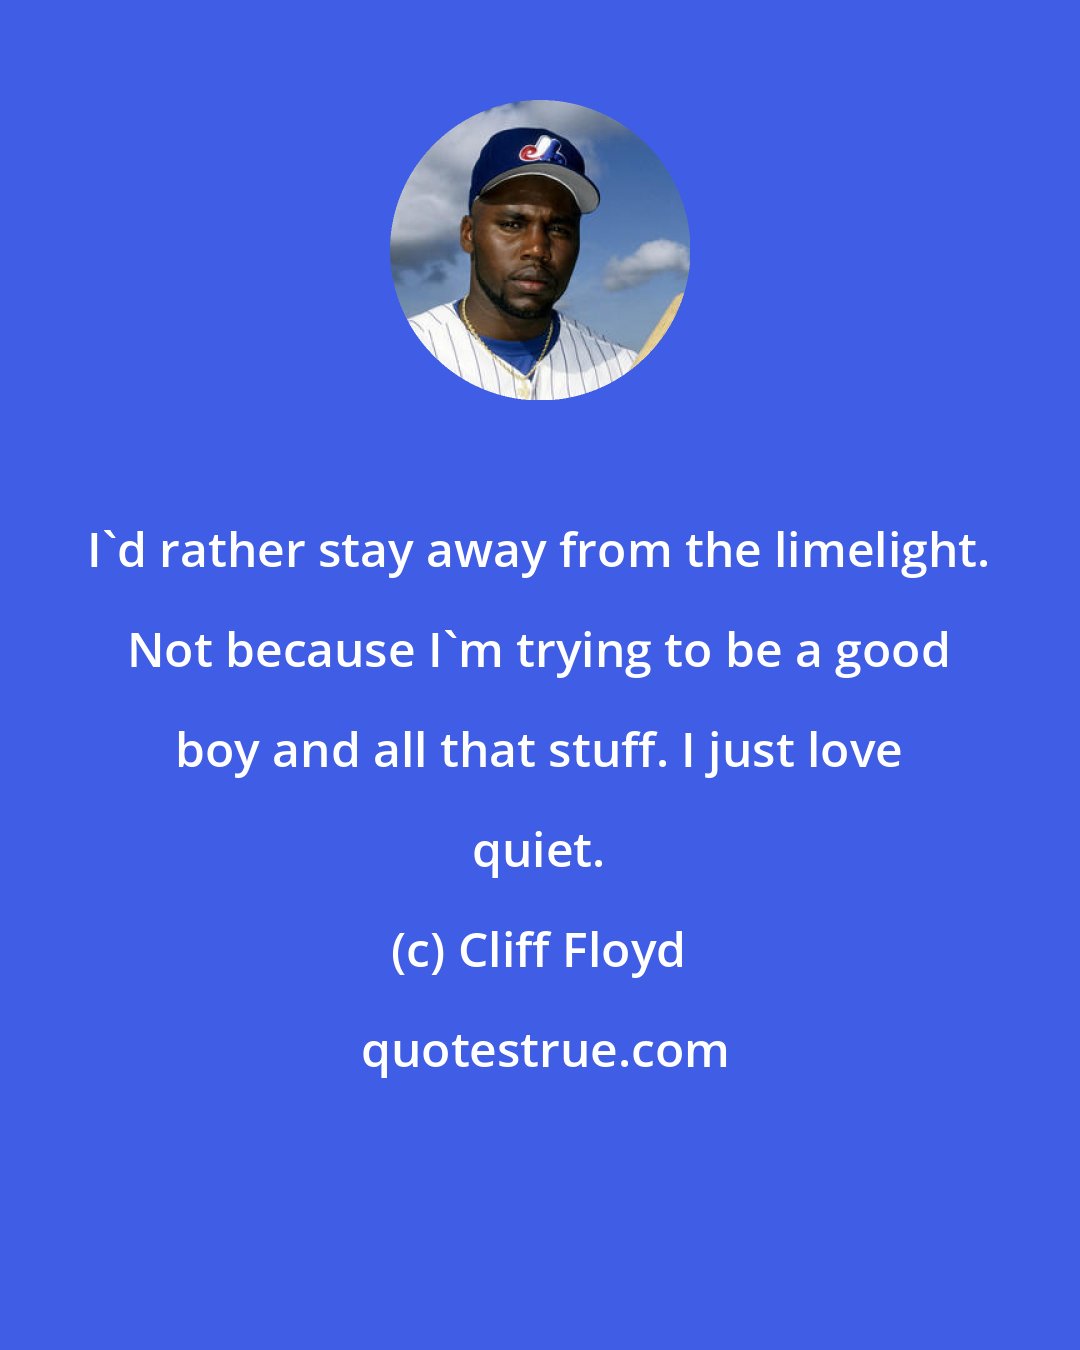 Cliff Floyd: I'd rather stay away from the limelight. Not because I'm trying to be a good boy and all that stuff. I just love quiet.